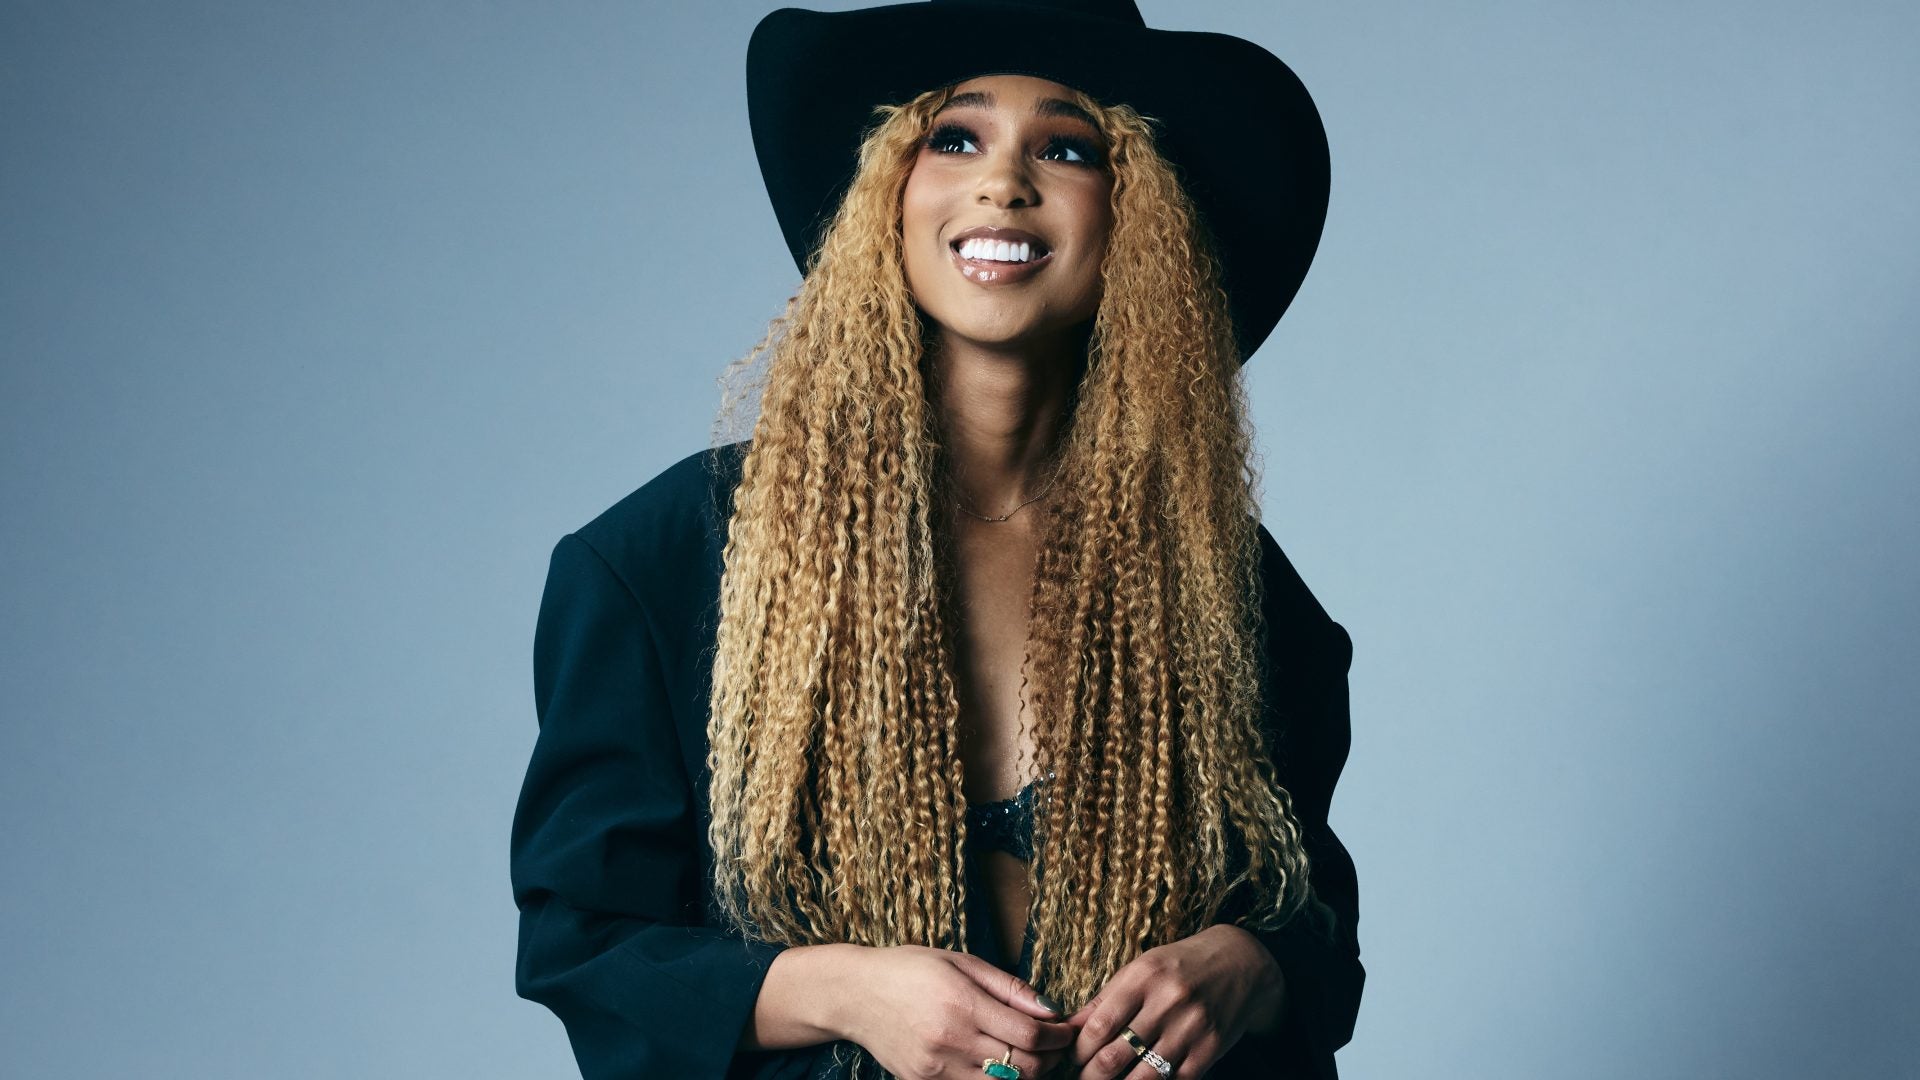 How Tiera Kennedy's 'Cowgirl' Grit Made Her Nashville's Sweetheart